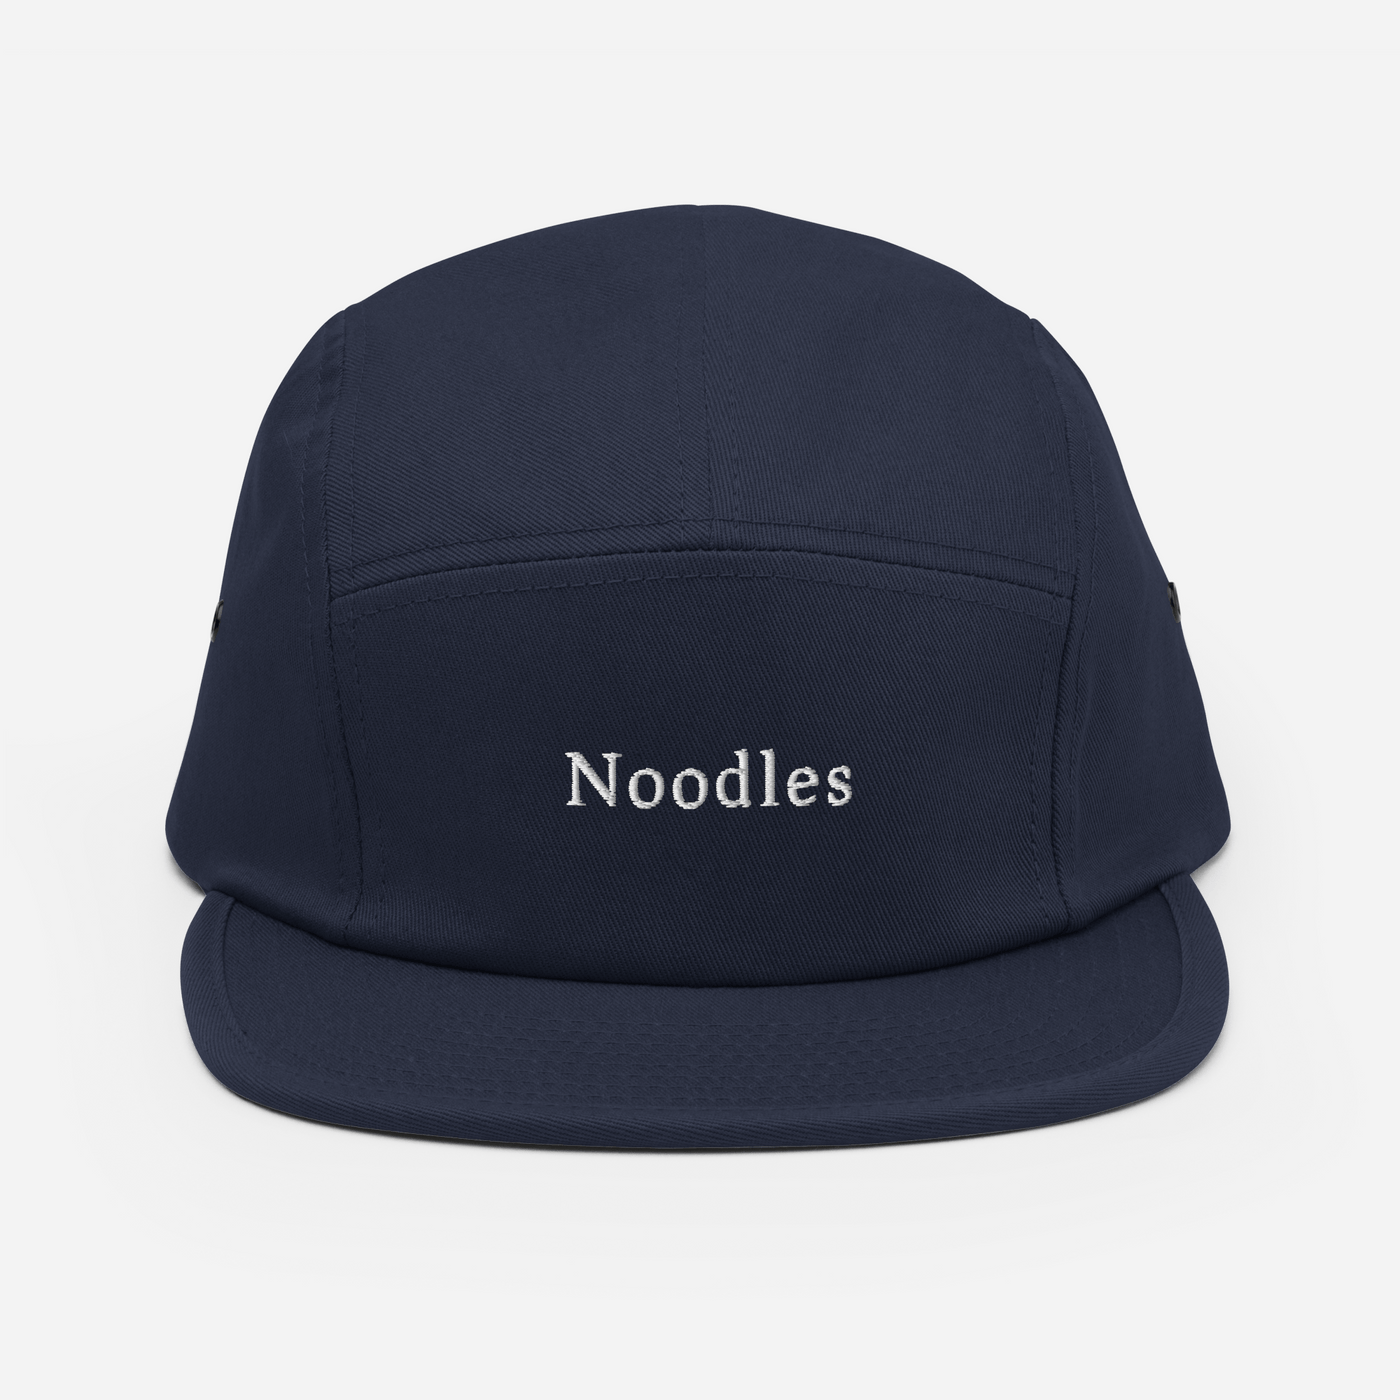 Noodles Five Panel Hat - Navy - - Just Another Cap Store